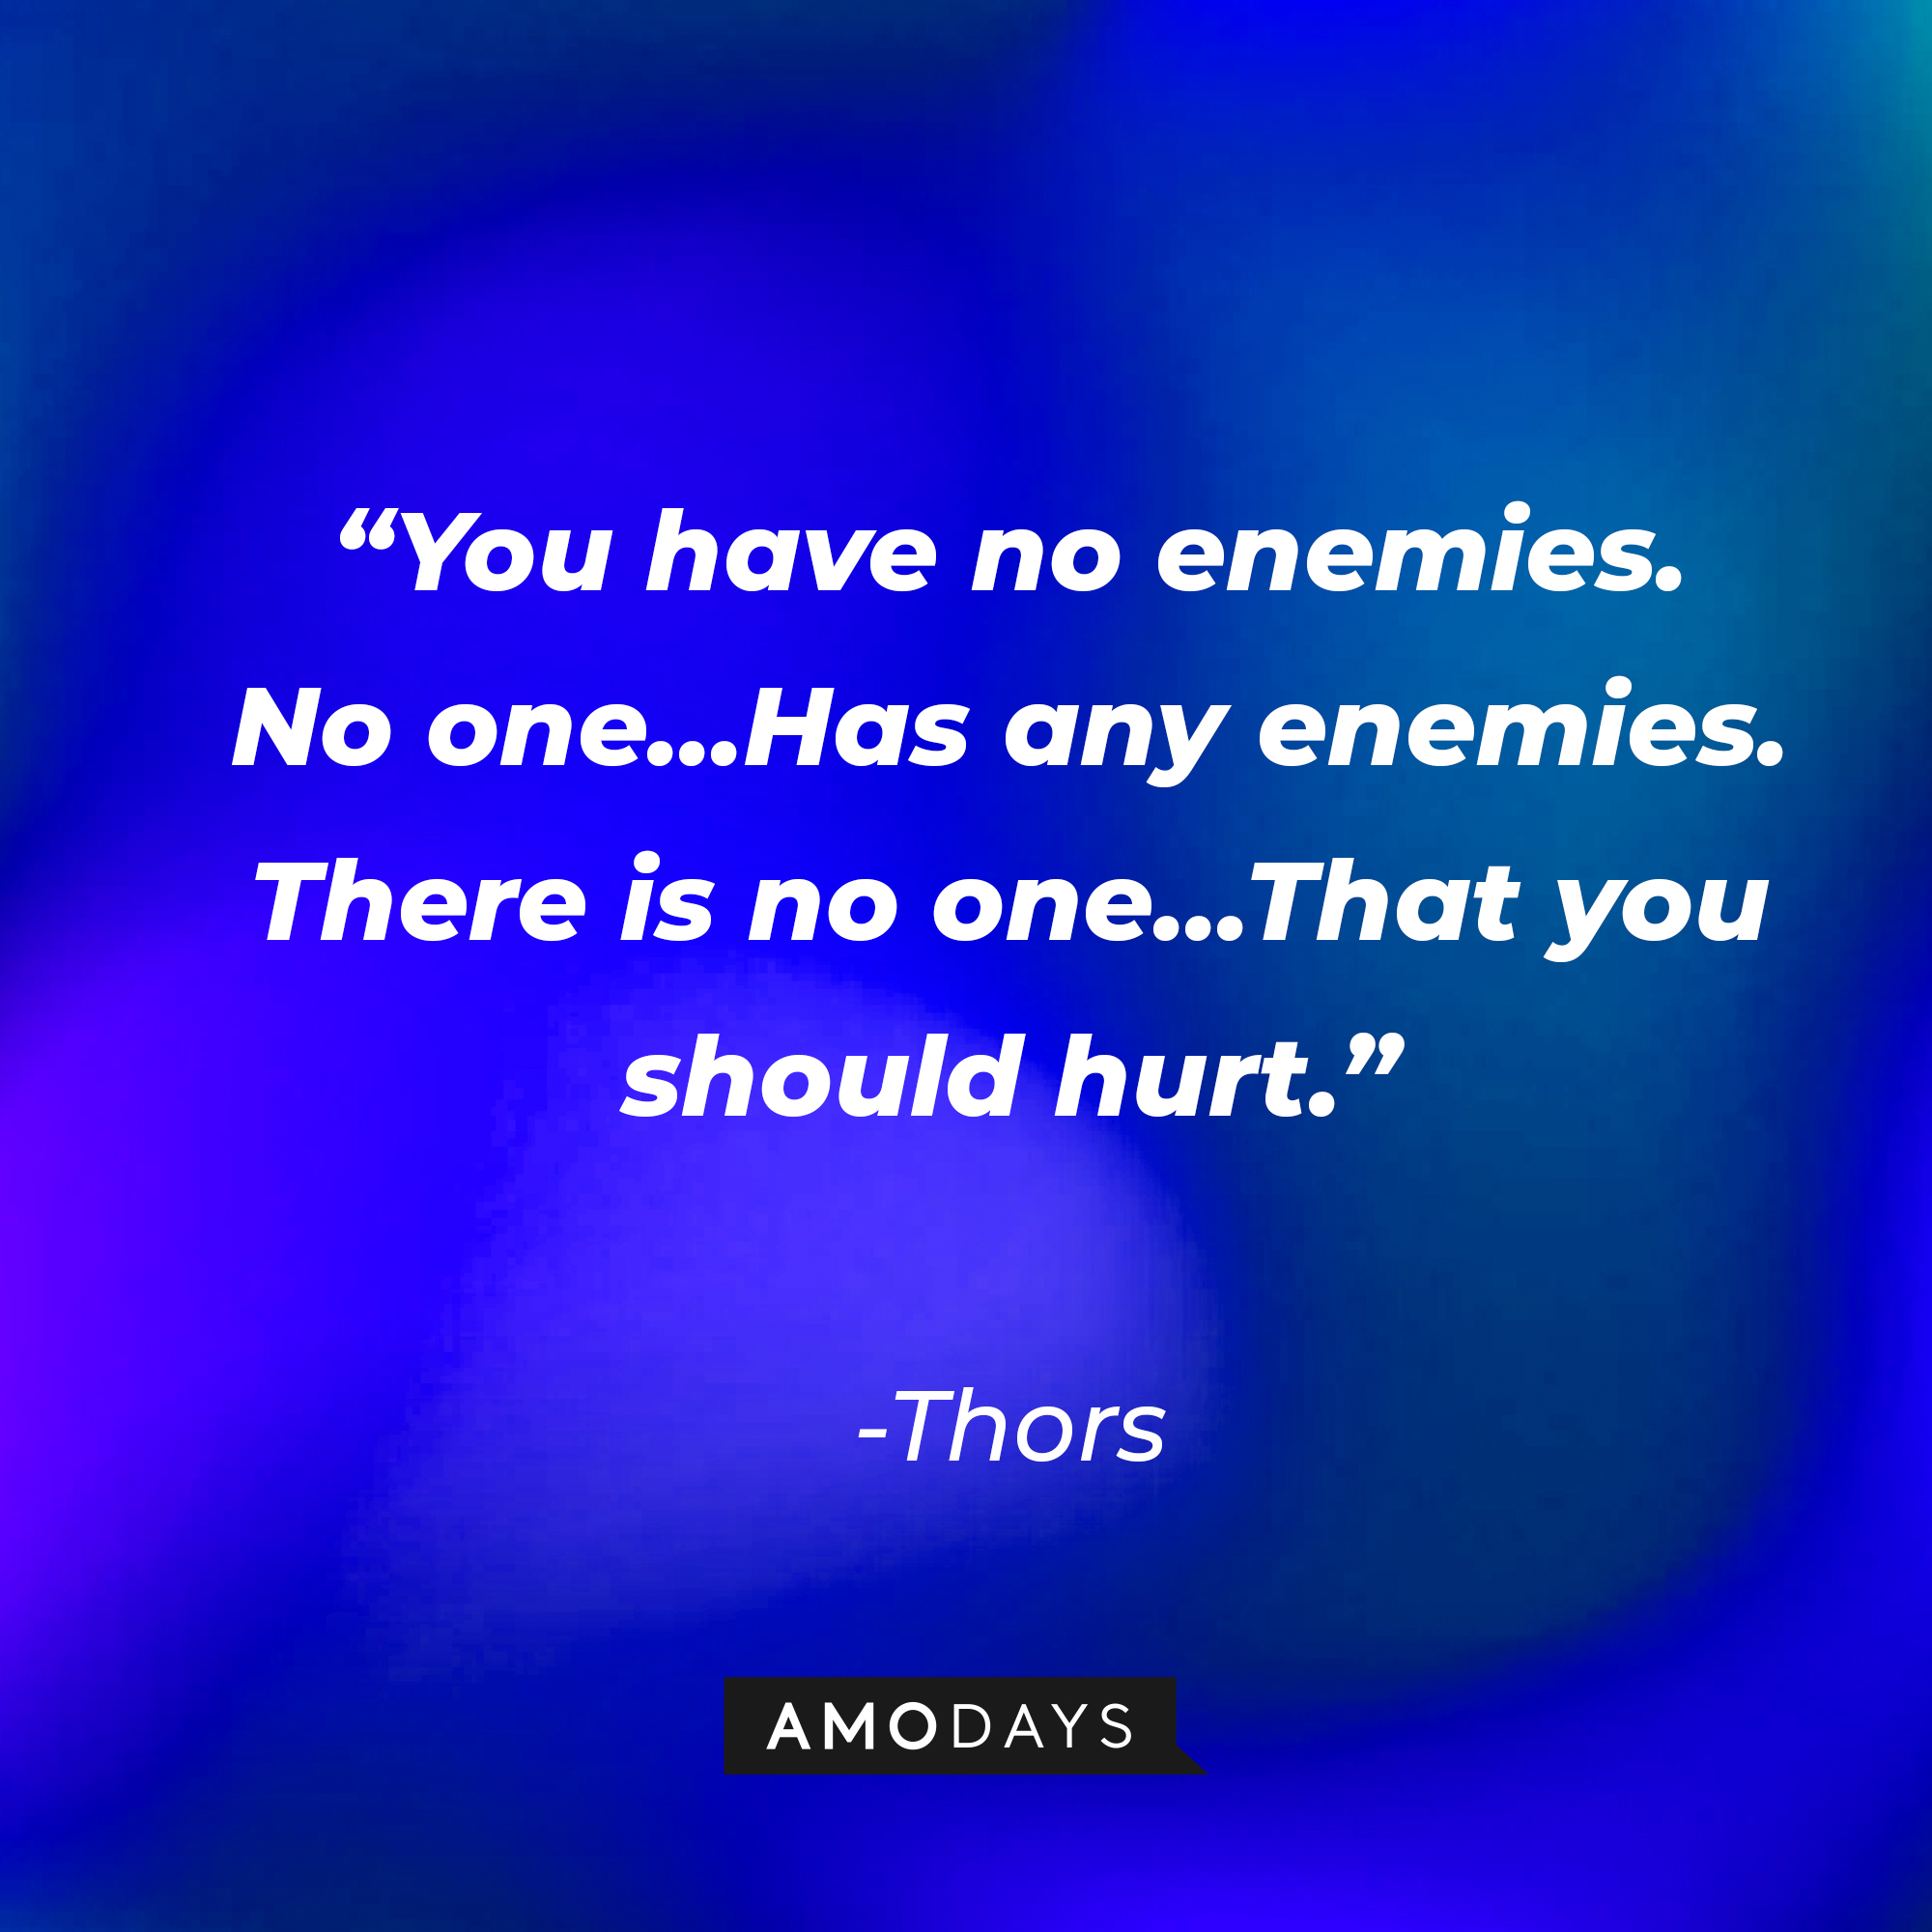 Thors’ quote: "You have no enemies. No one…Has any enemies. There is no one…That you should hurt.” | Source: Amodays